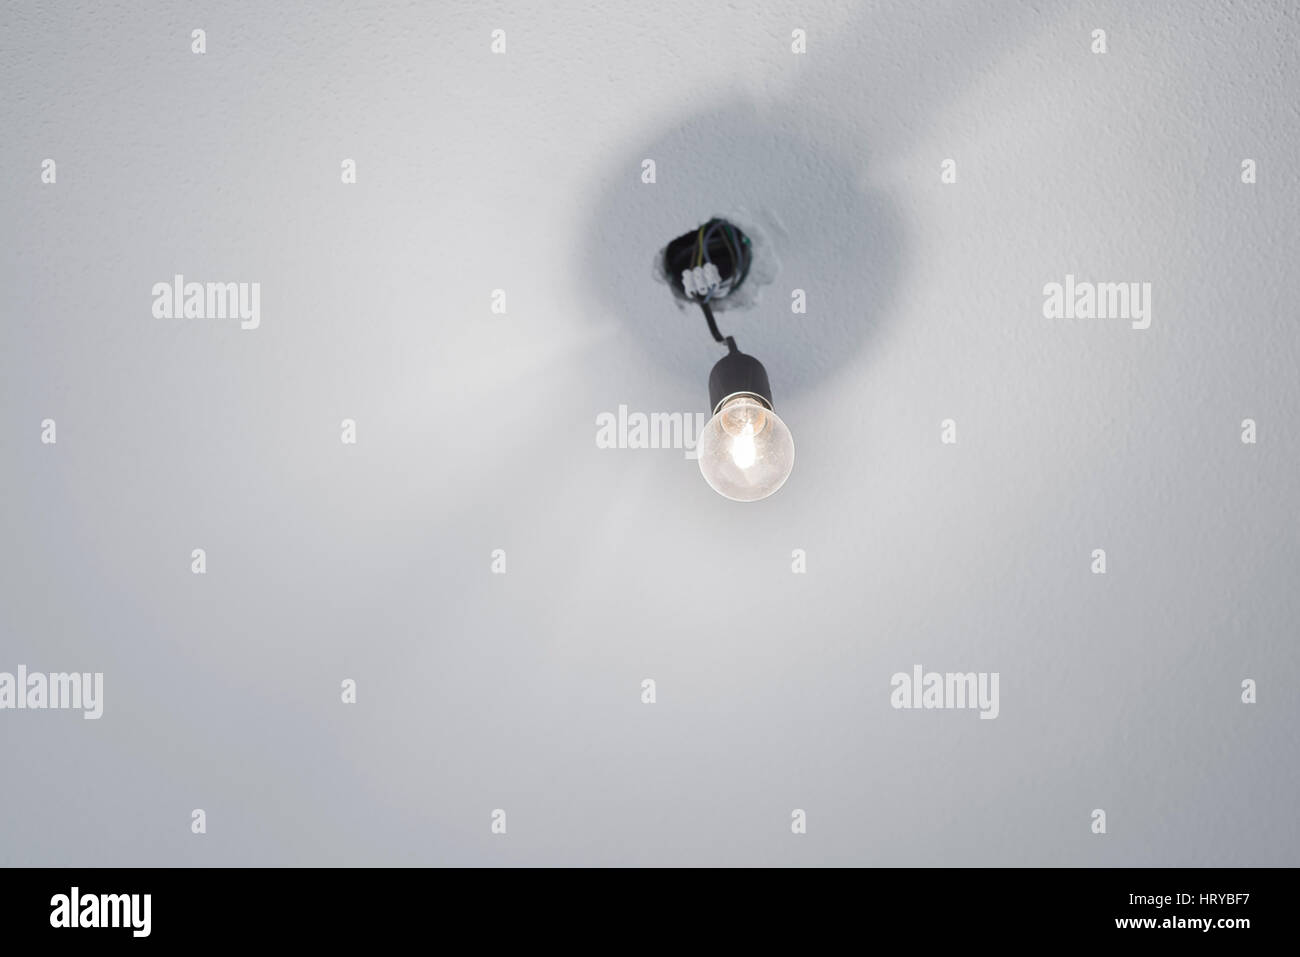 Illuminated halogen incandescent light bulb in a black plastic lamp holder socket with power cables protruding from a ceiling with white rough plaster Stock Photo